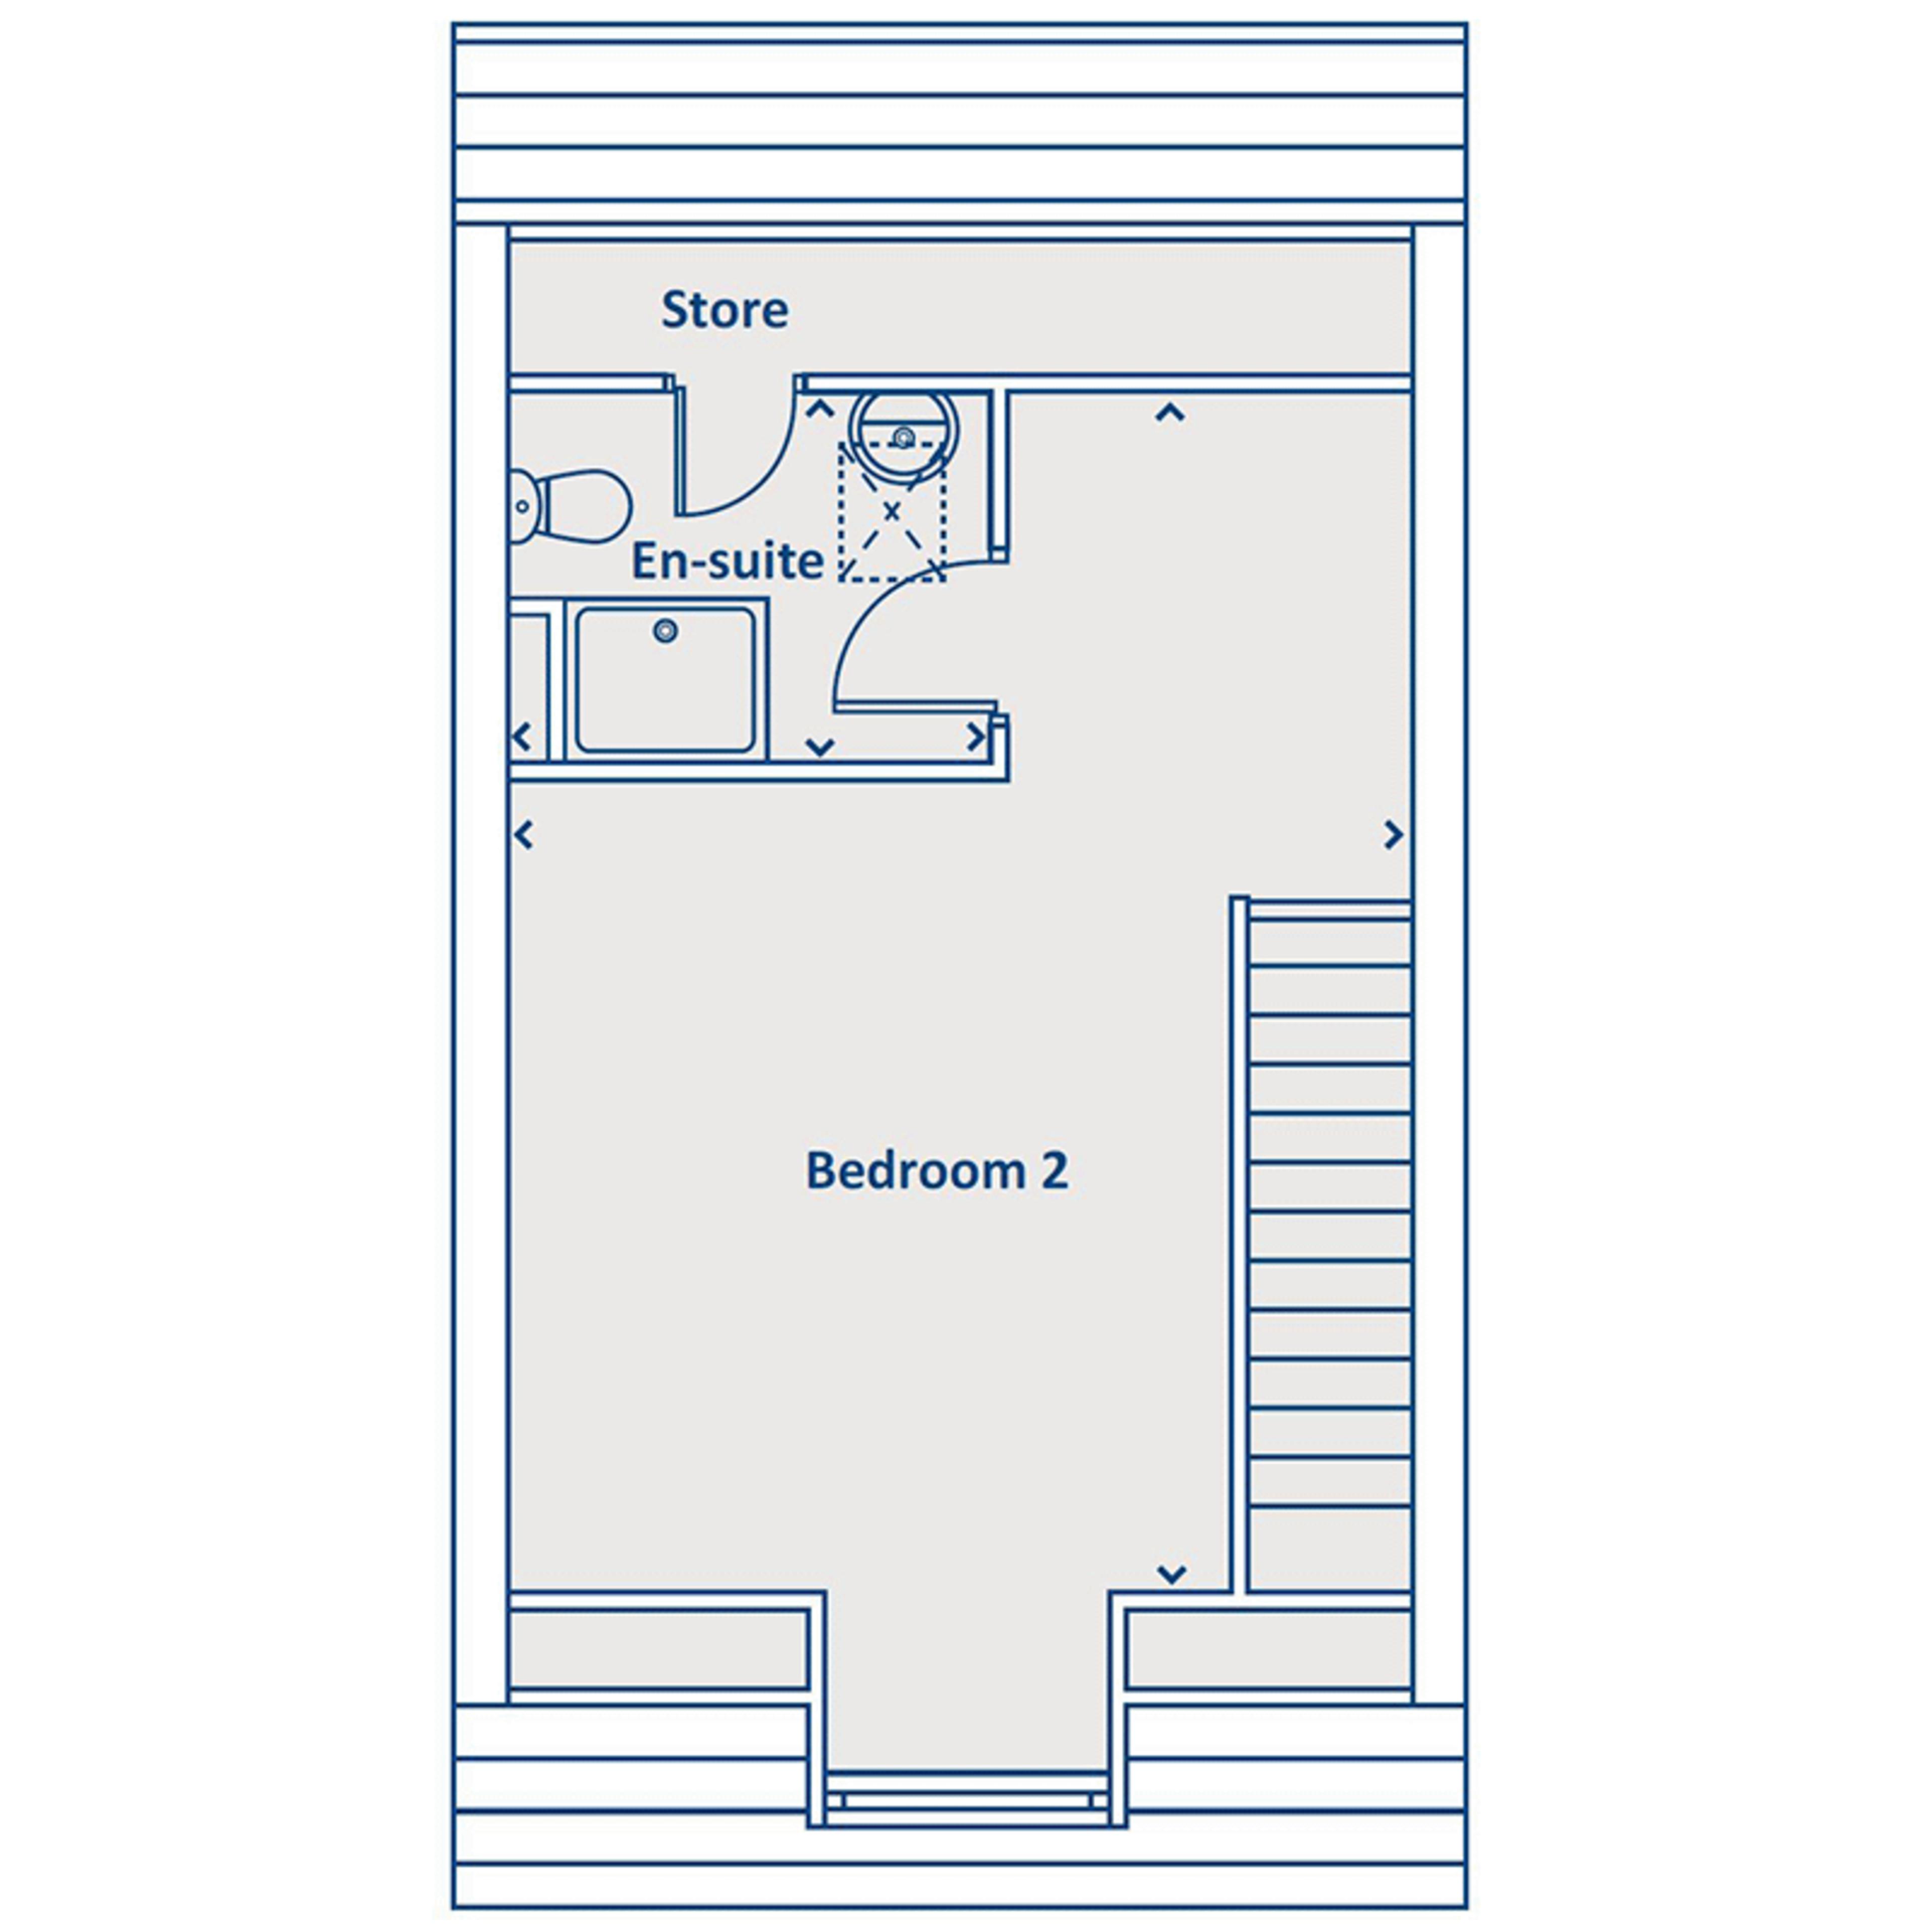 Layout of second floor in the Stratford